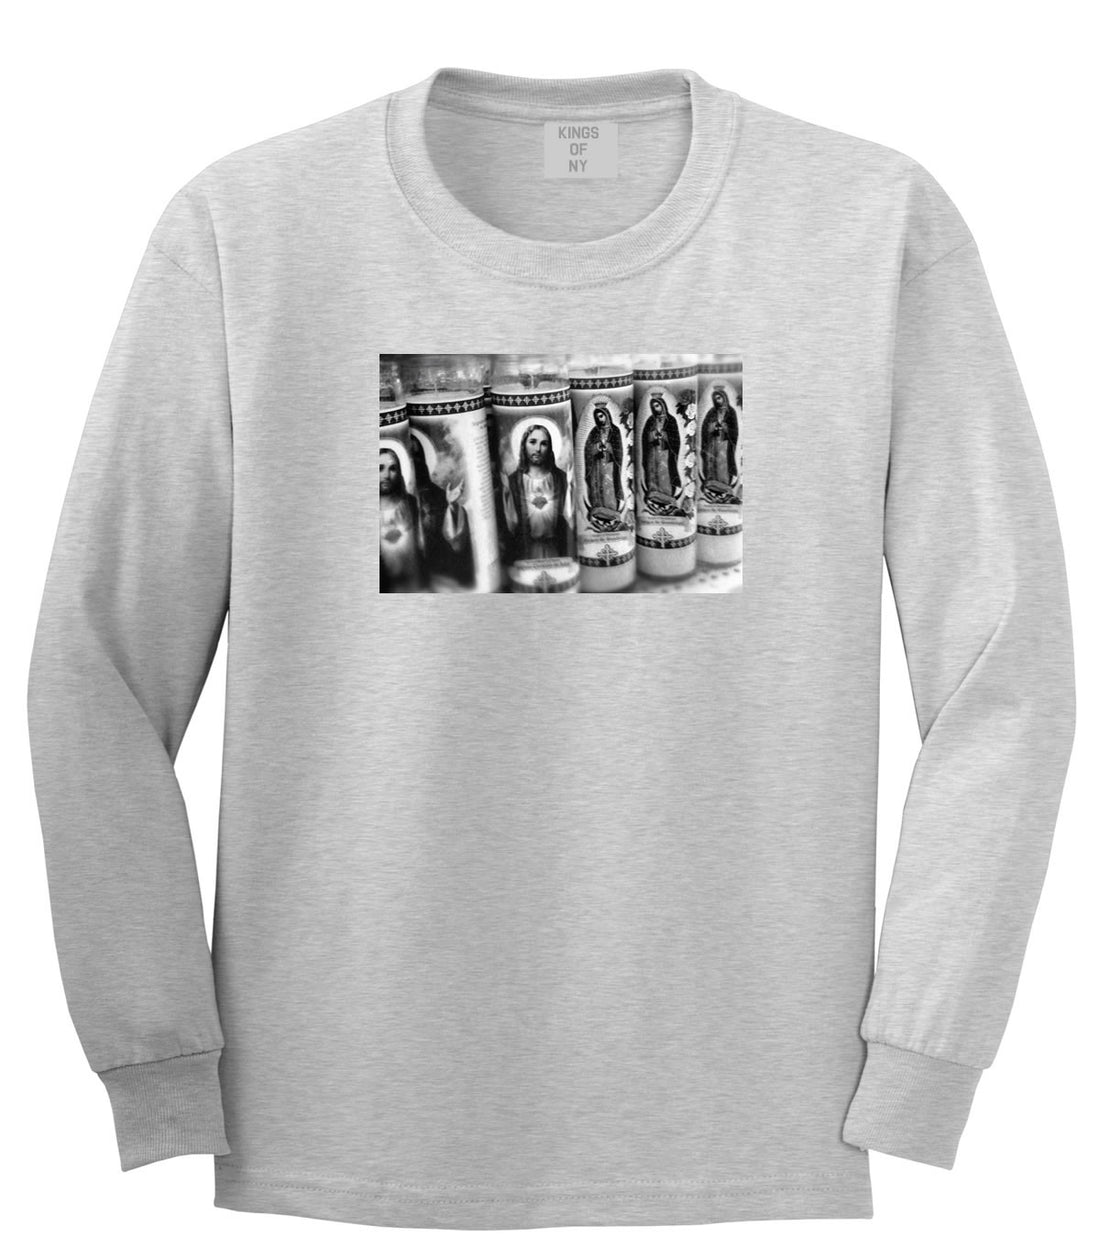 Candles Religious God Jesus Mary Fire NYC Long Sleeve Boys Kids T-Shirt In Grey by Kings Of NY